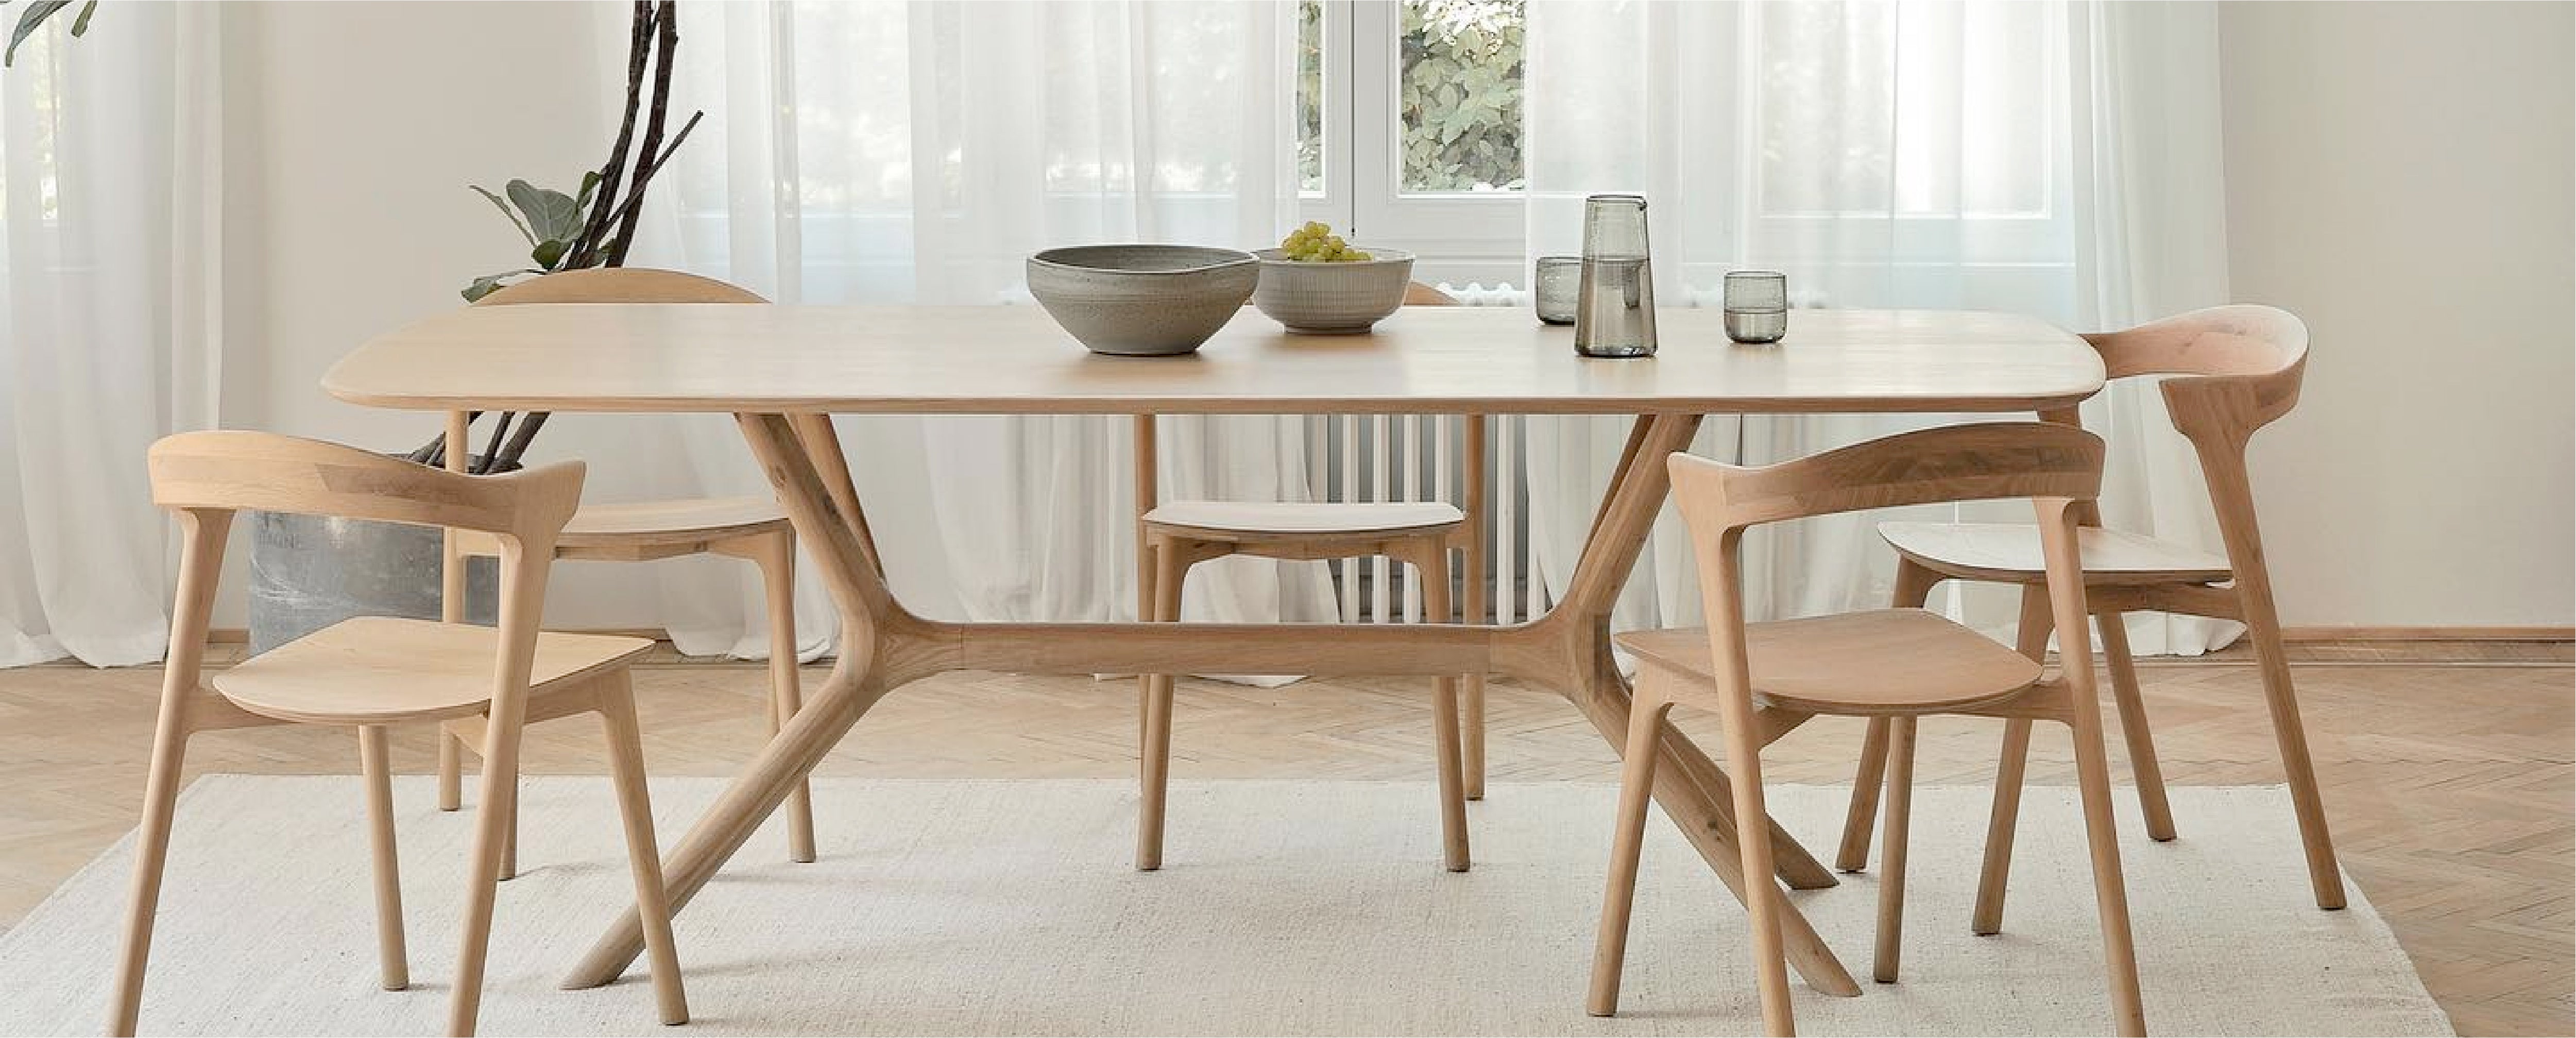 ETHNICRAFT WOOD DINING TABLE